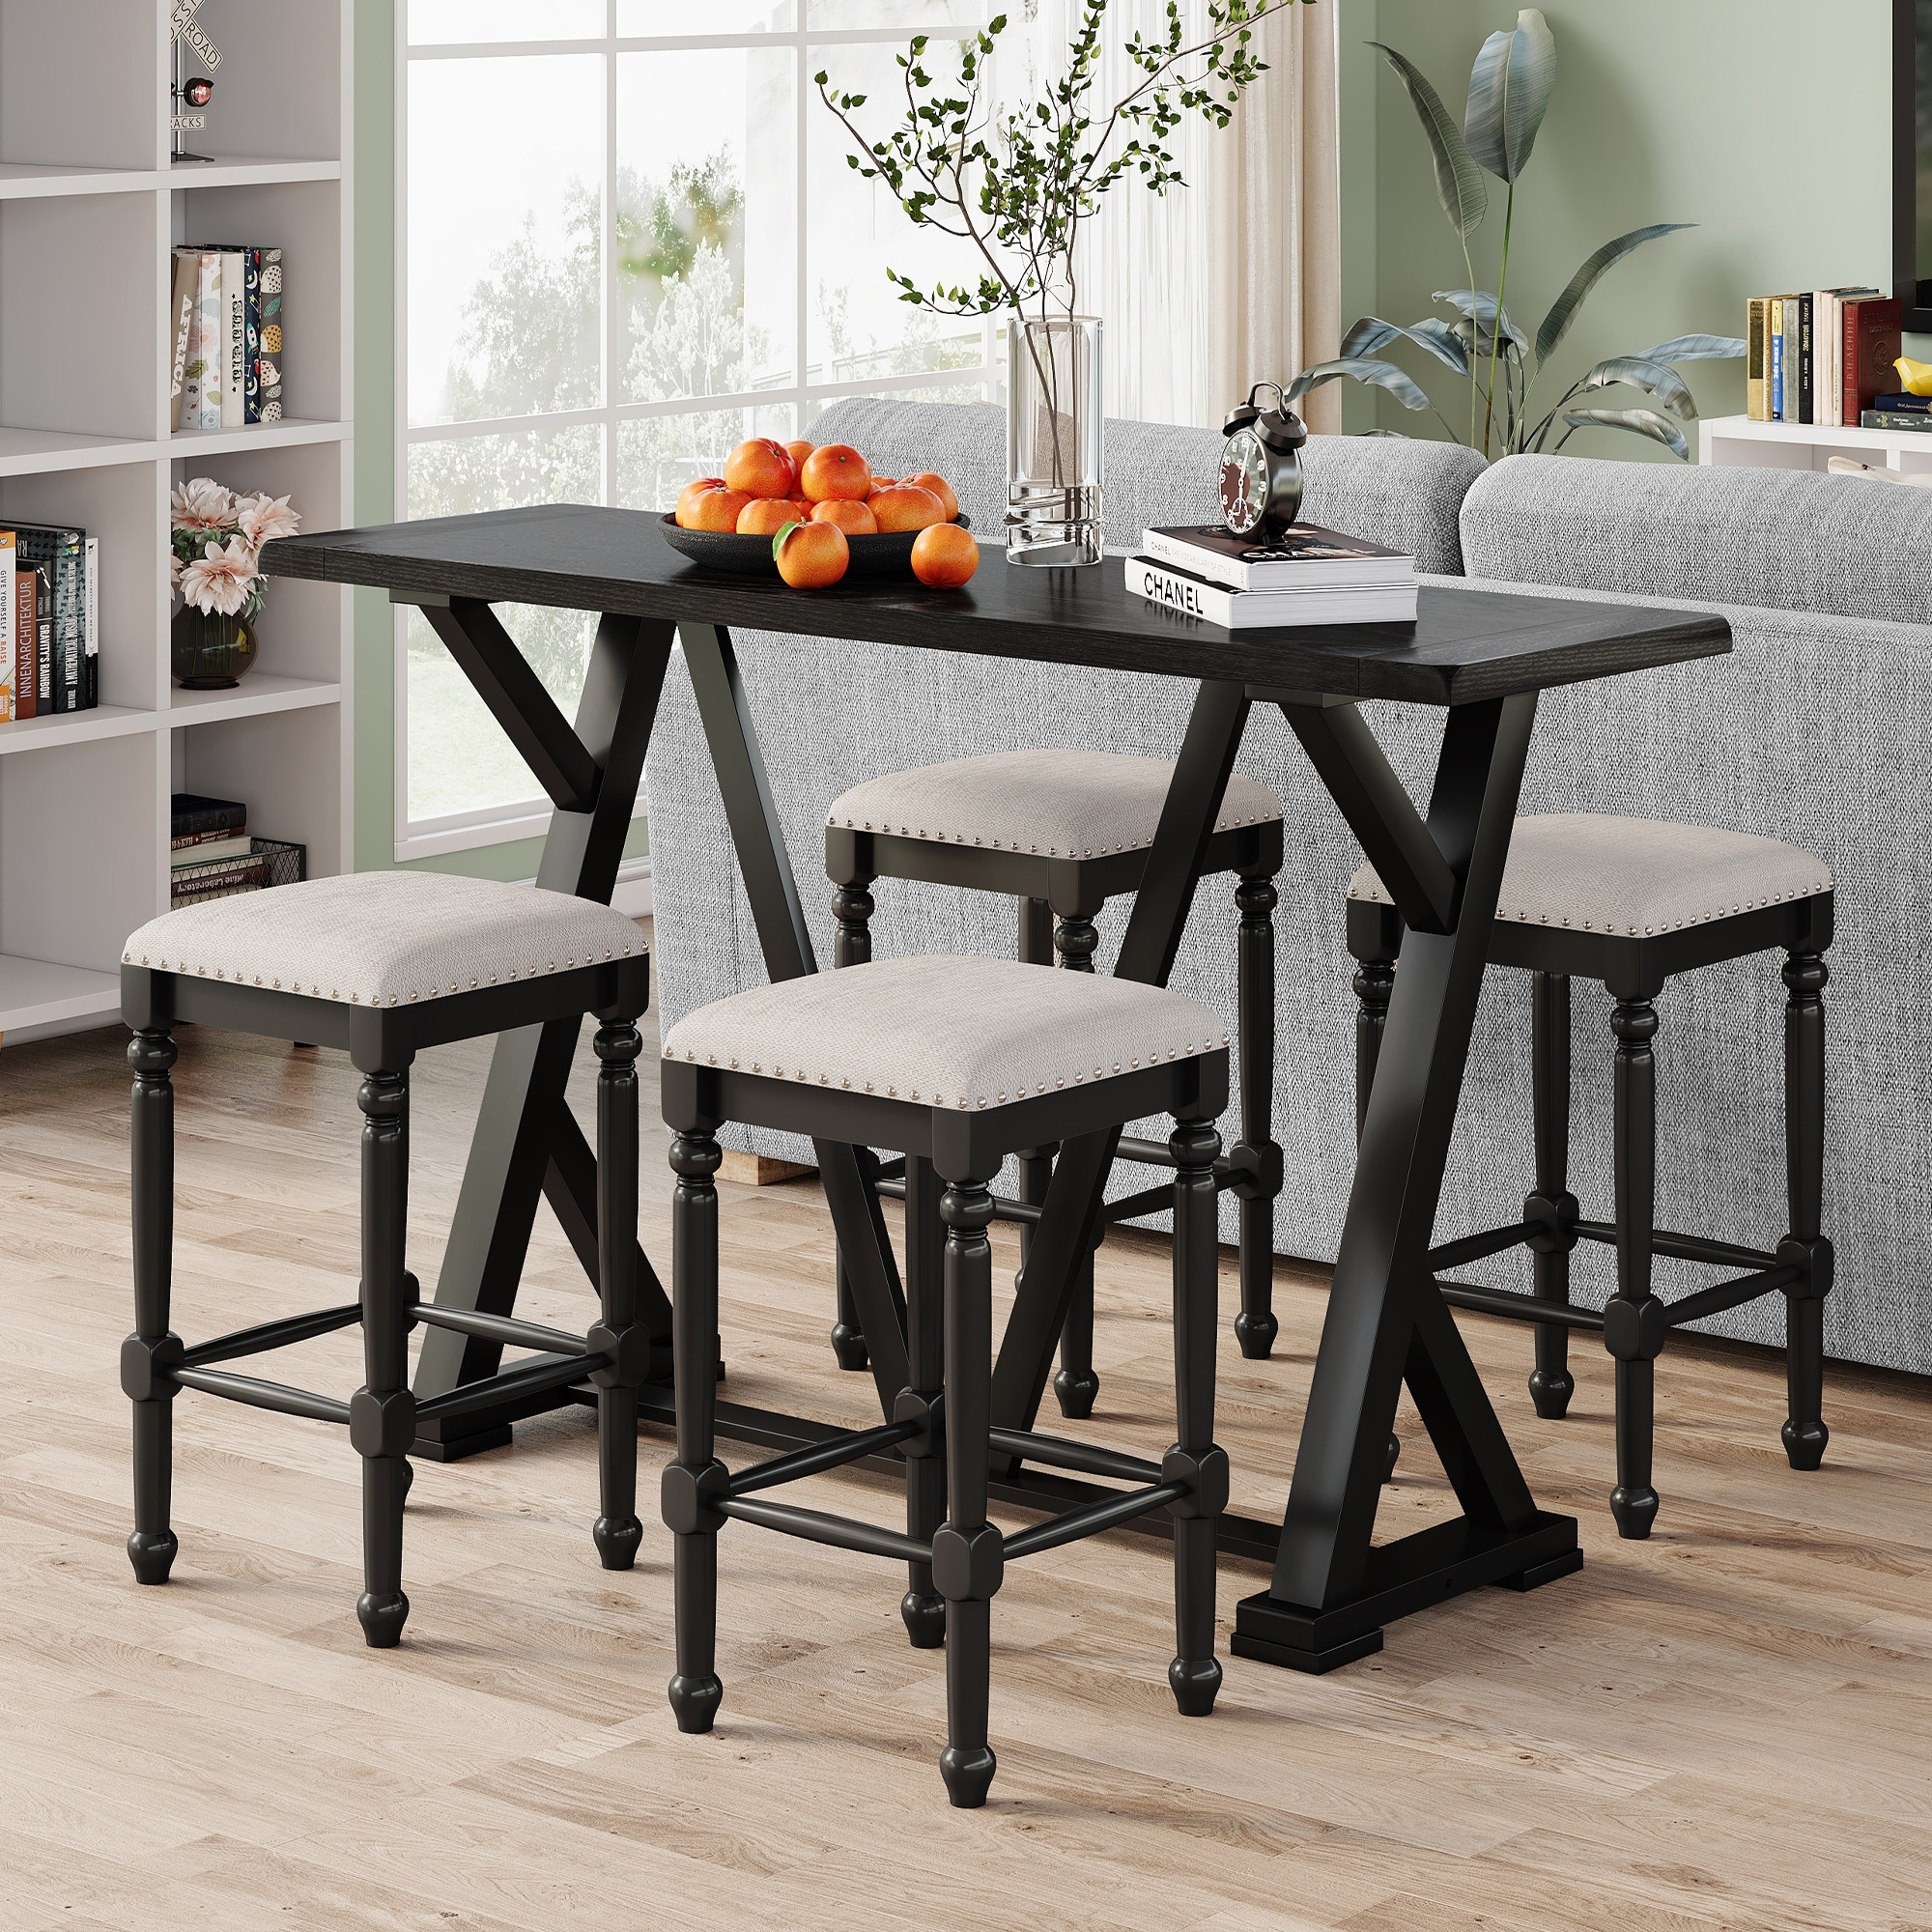 Chanel 5 pc Dining Set Coaster Furniture Dining Room